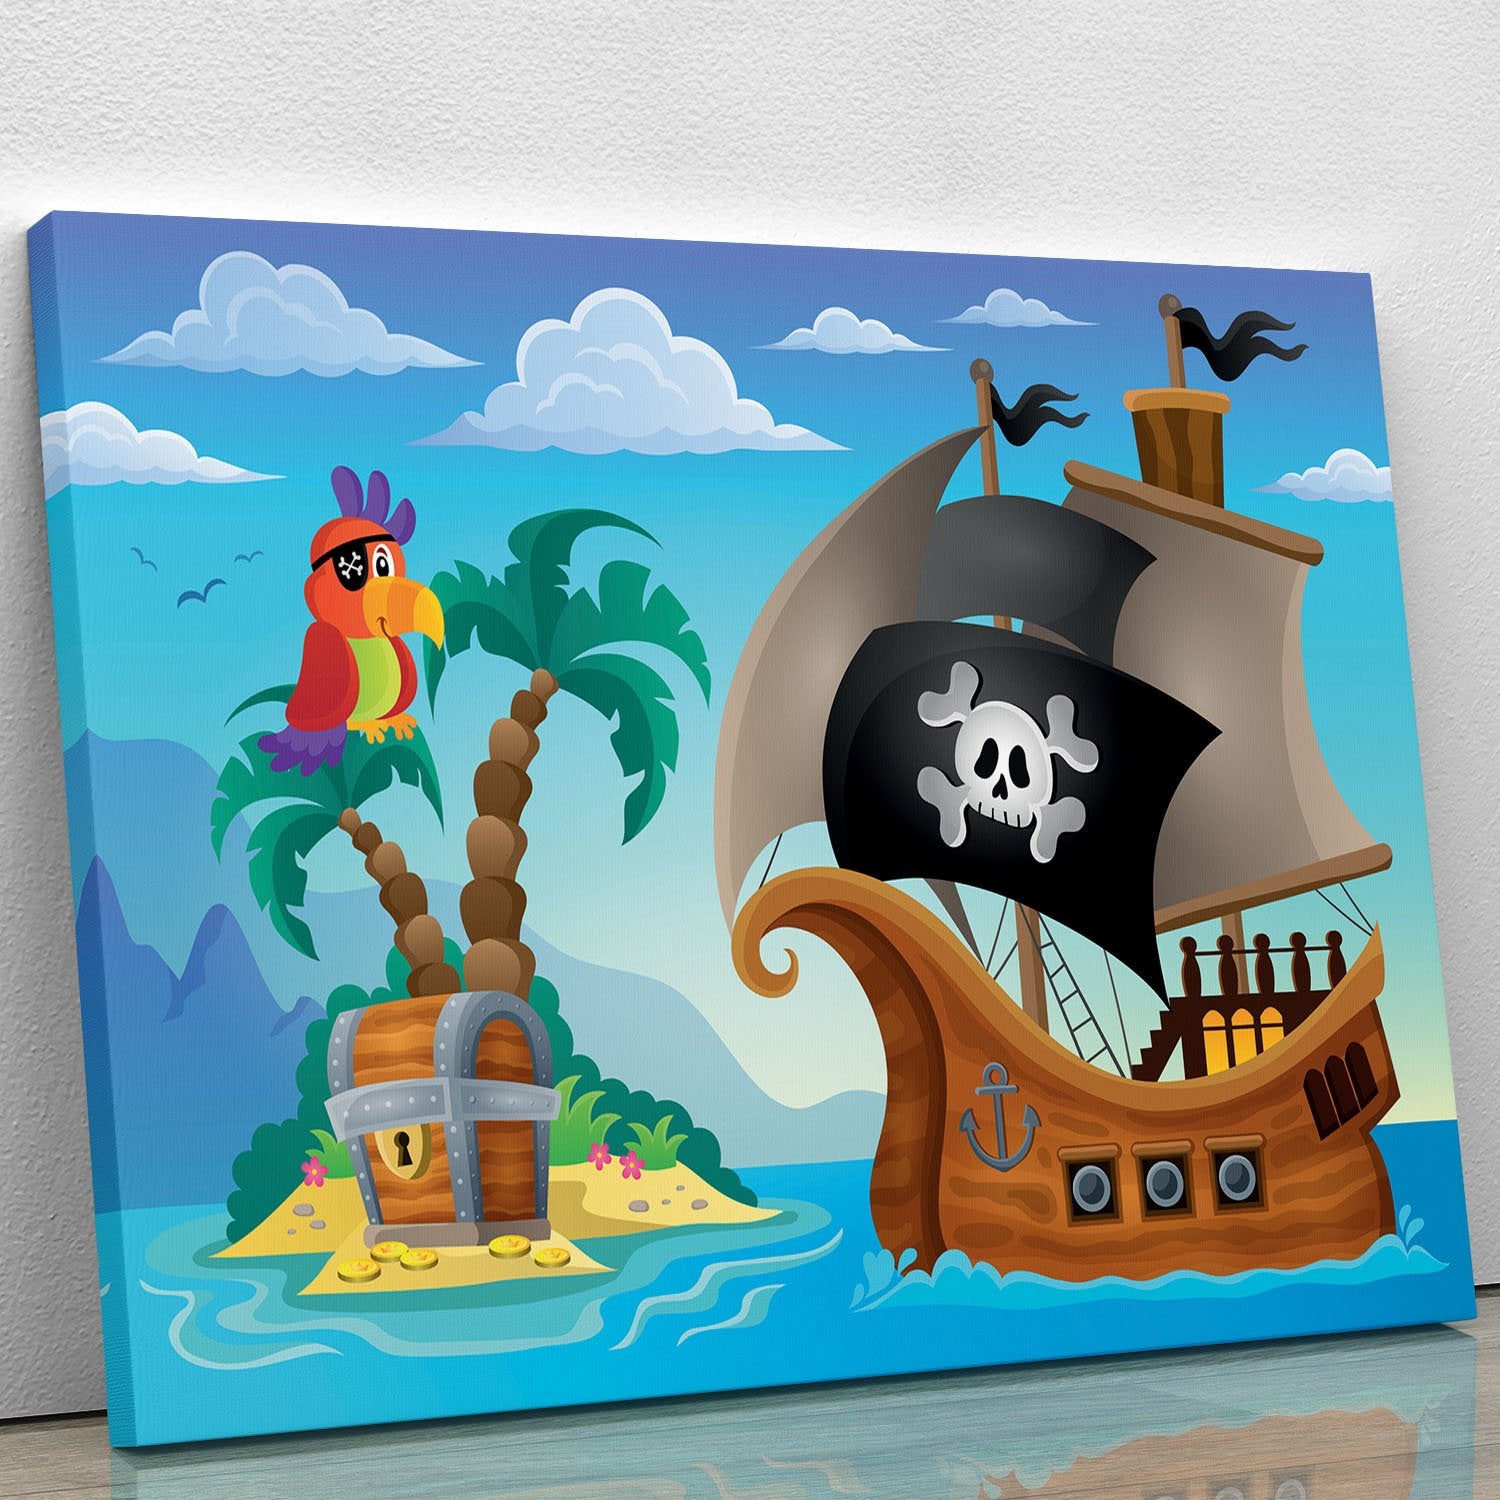 Small pirate island theme 2 Canvas Print or Poster